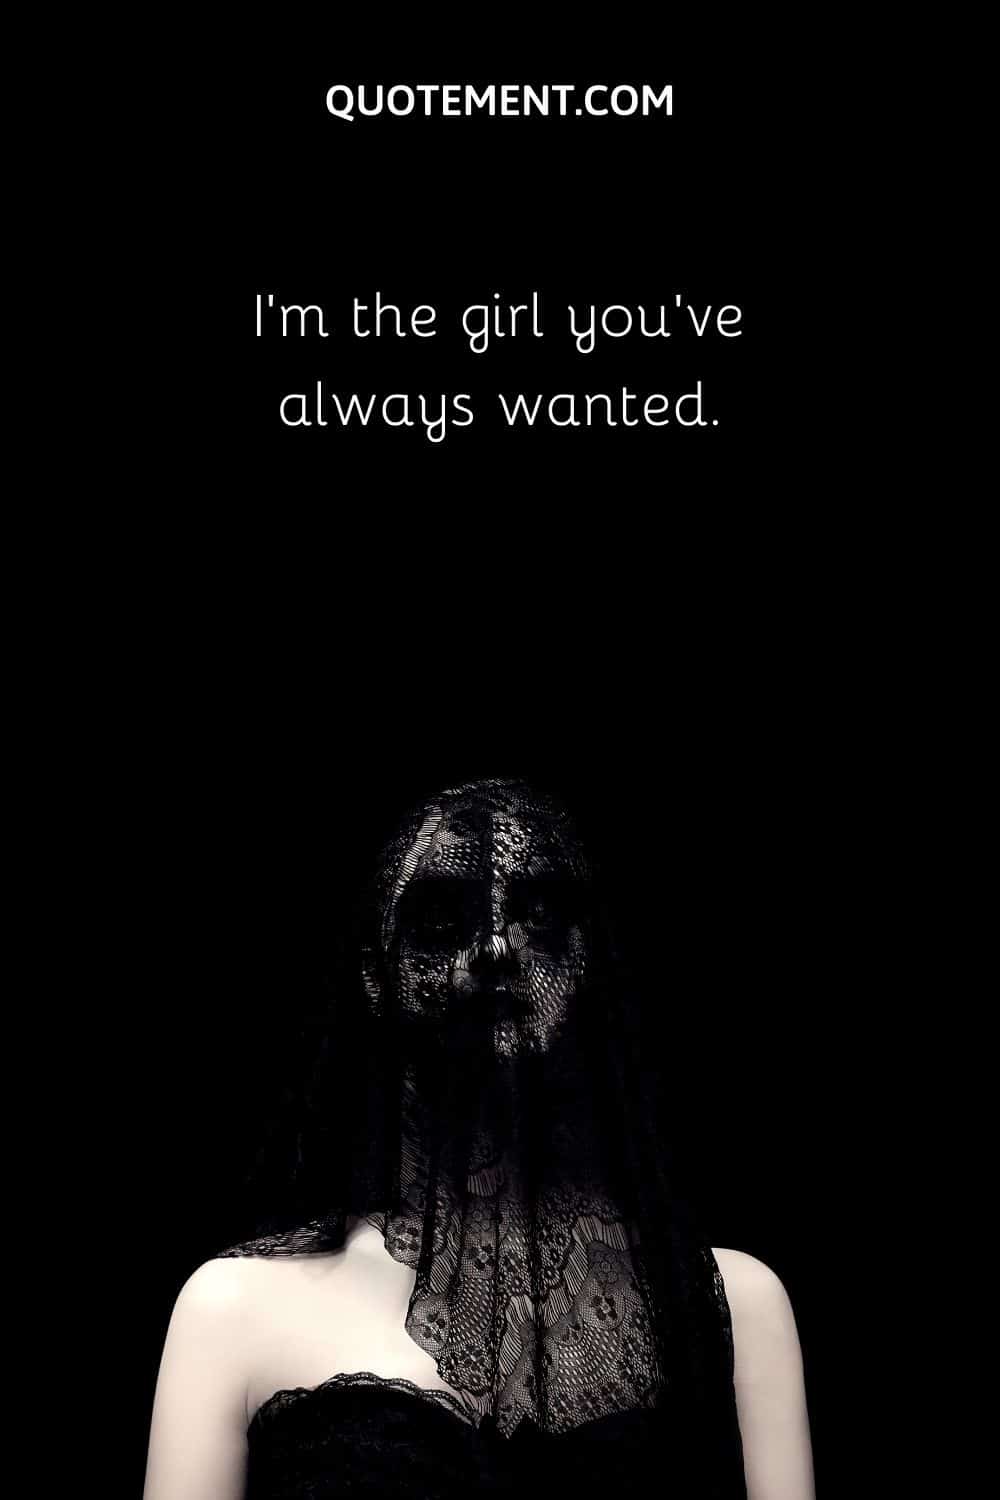 I’m the girl you’ve always wanted